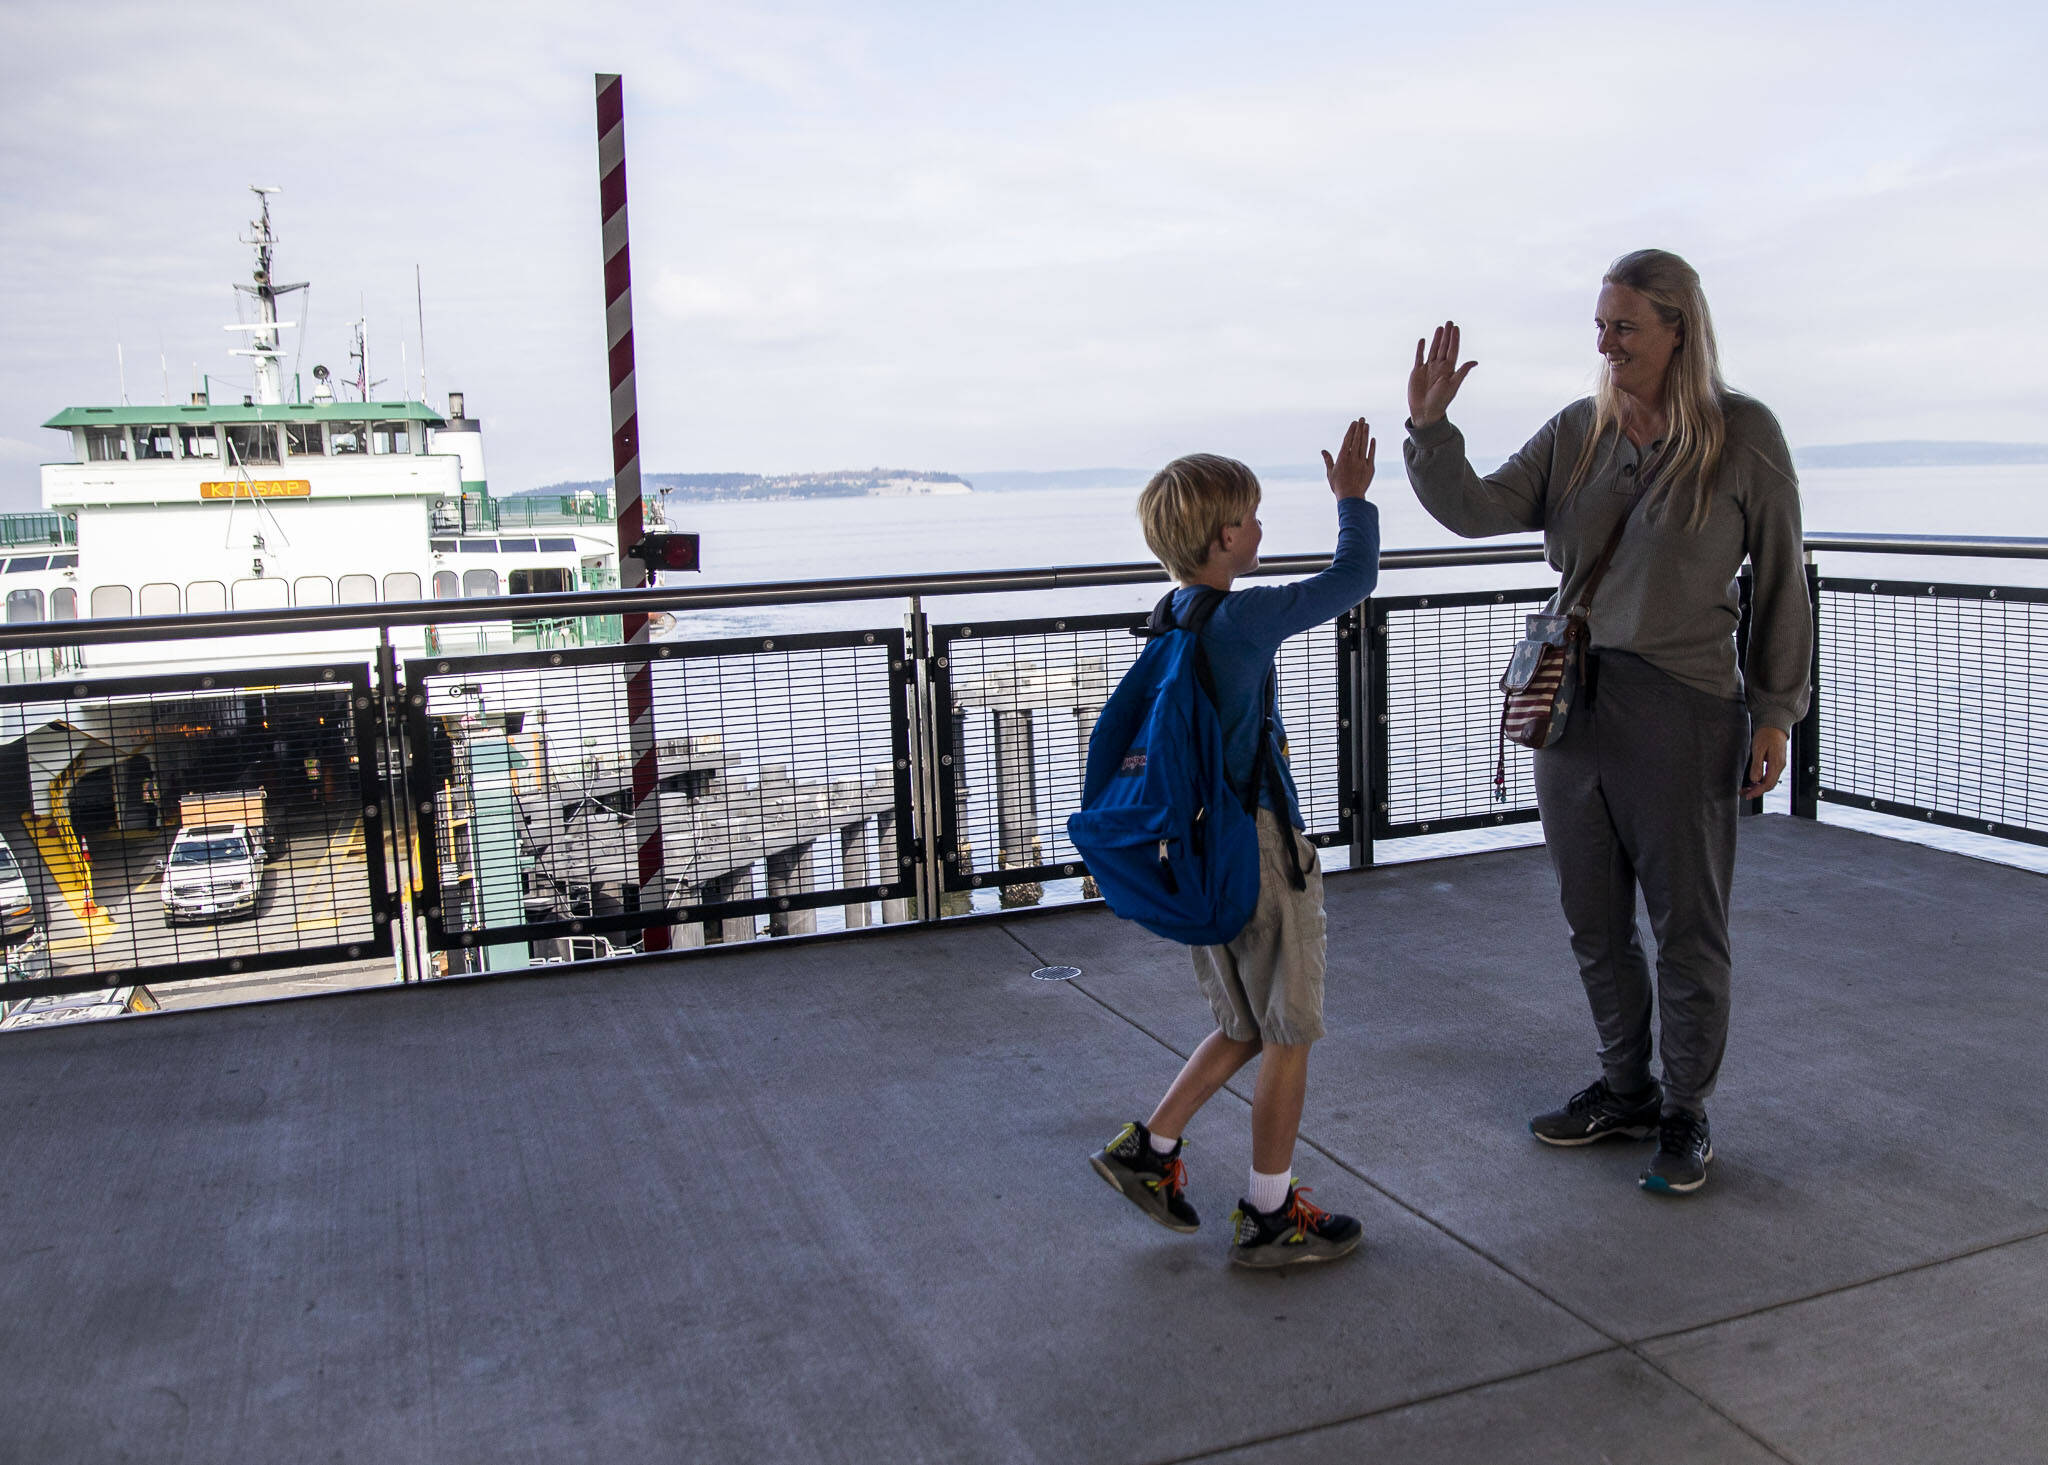 Genghin Carroll, 8, walks up and high fives his mom, Andria Carroll, after riding the ferry over to meet her for a dental appointment on Thursday, Mukilteo. (Olivia Vanni / The Herald)